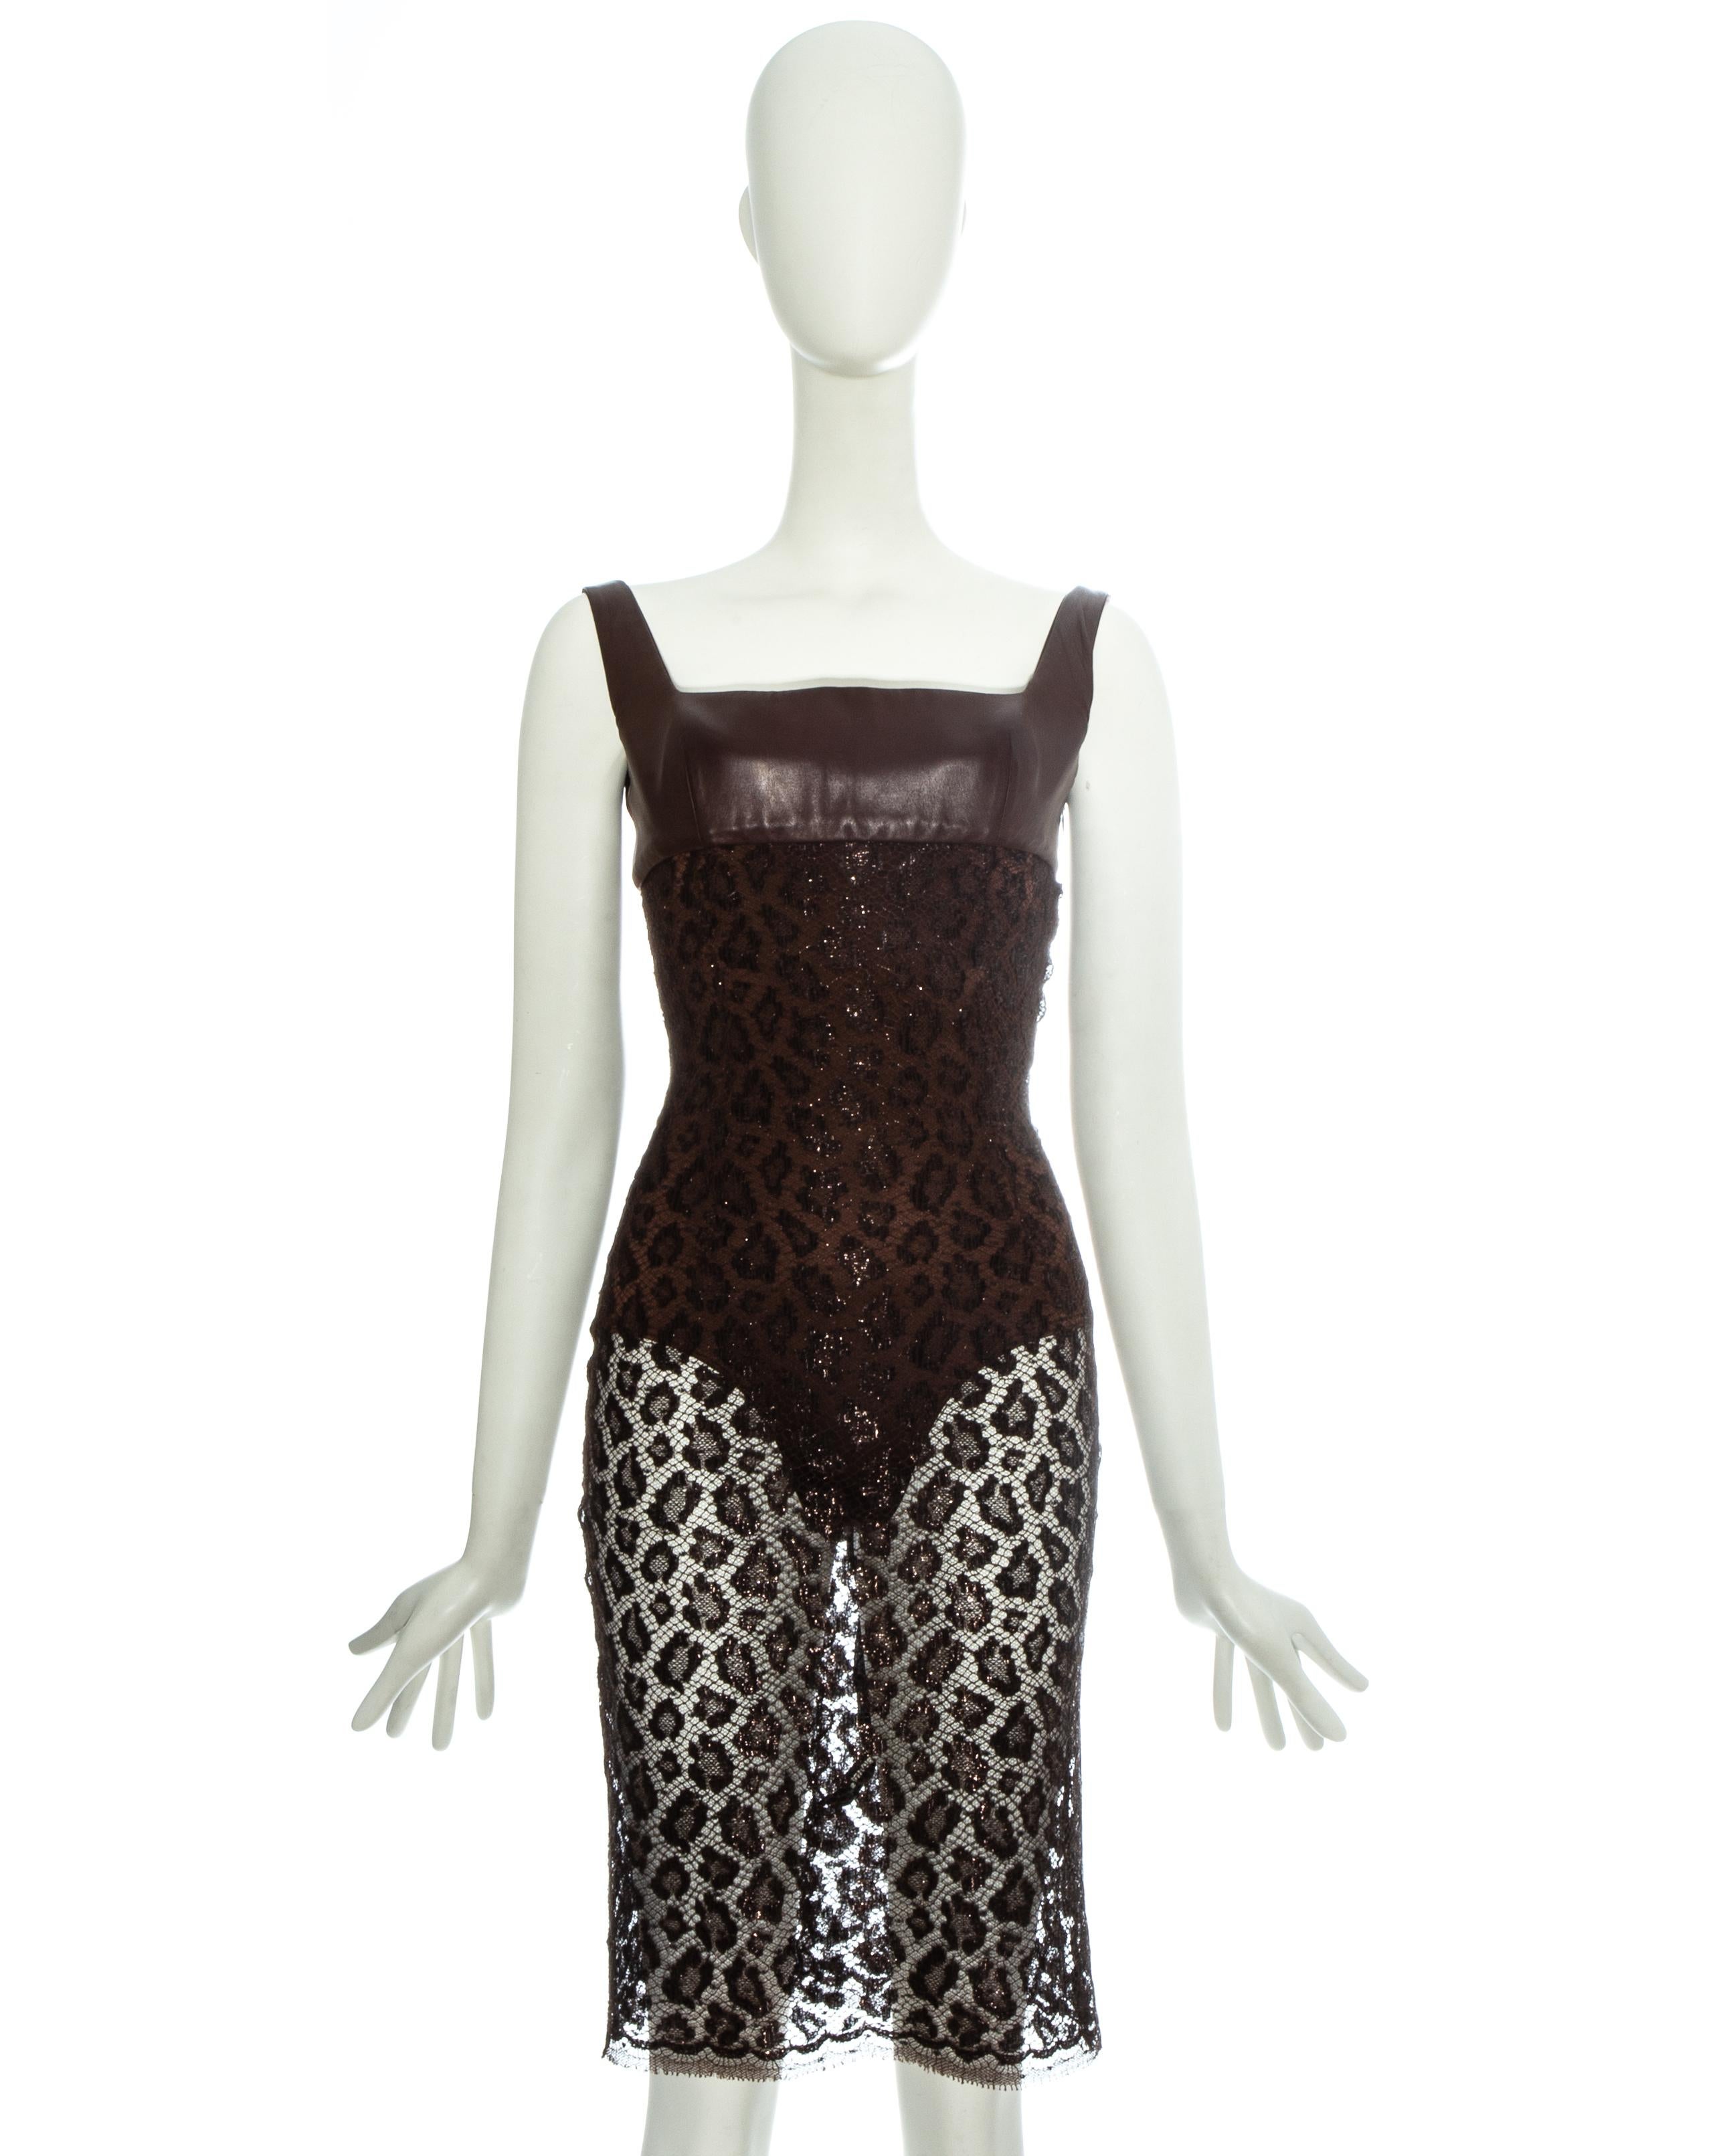 Atelier Versace Couture evening dress with leather bust with built in corset, leopard lamé lace and attached bodysuit 

Spring-Summer 1996 

- Please note that this dress is a couture piece which was made especially for client of Gianni Versace; the